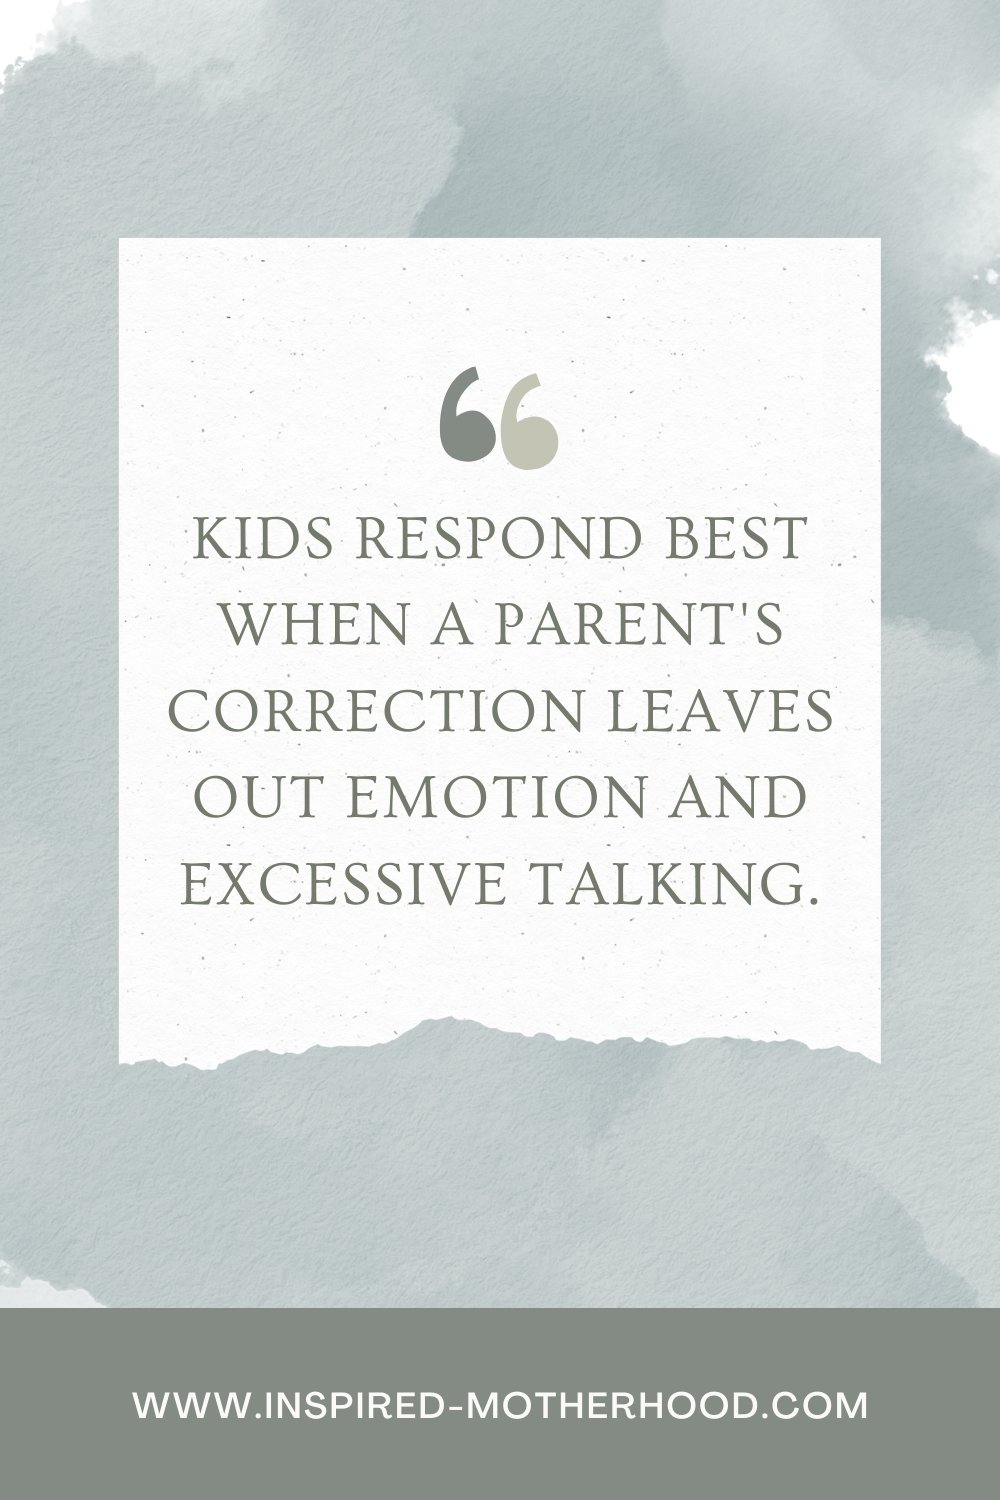 Kids respond best when a parent's correction leaves out the emotion and there isn't much excessive talking. Use this when correcting behavior.